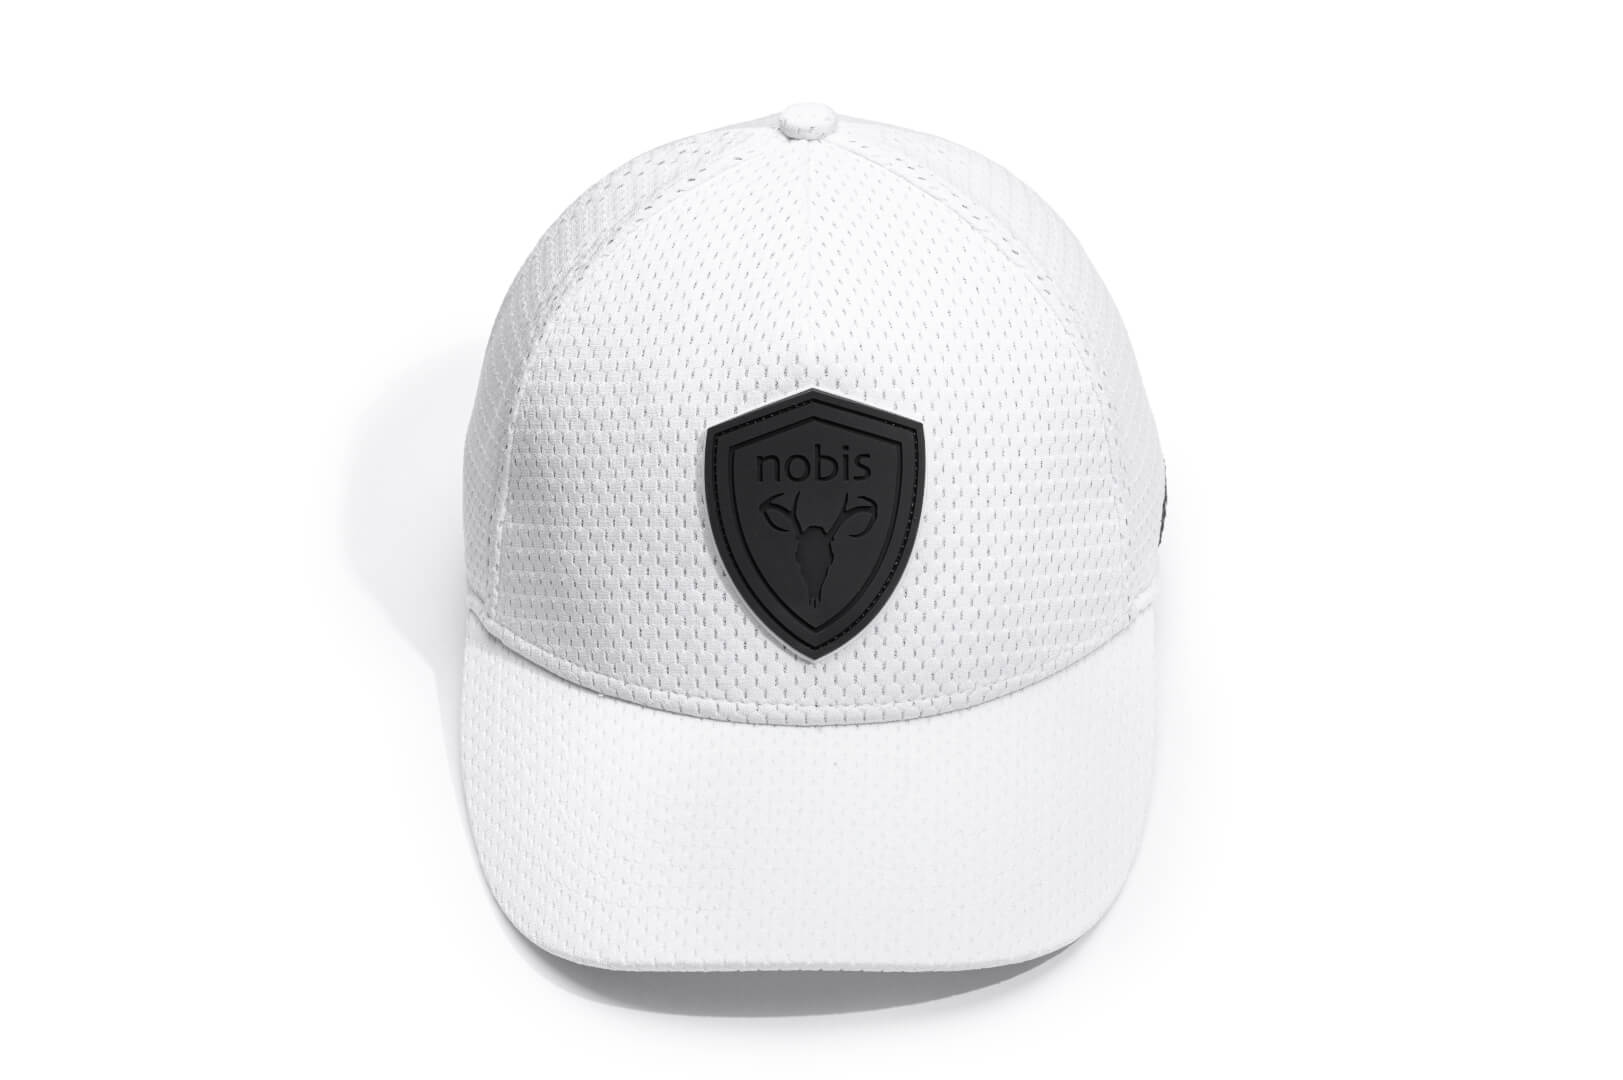 Ciryl Gane x Nobis 5-Panel Adjustable Cap in 5-panel jersey construction, curved brim, adjustable strap at back, tonal black Nobis shield logo attached on crown front, "Bon Gamin" embroidered on the left, and flag of France embroidered on the back, in White